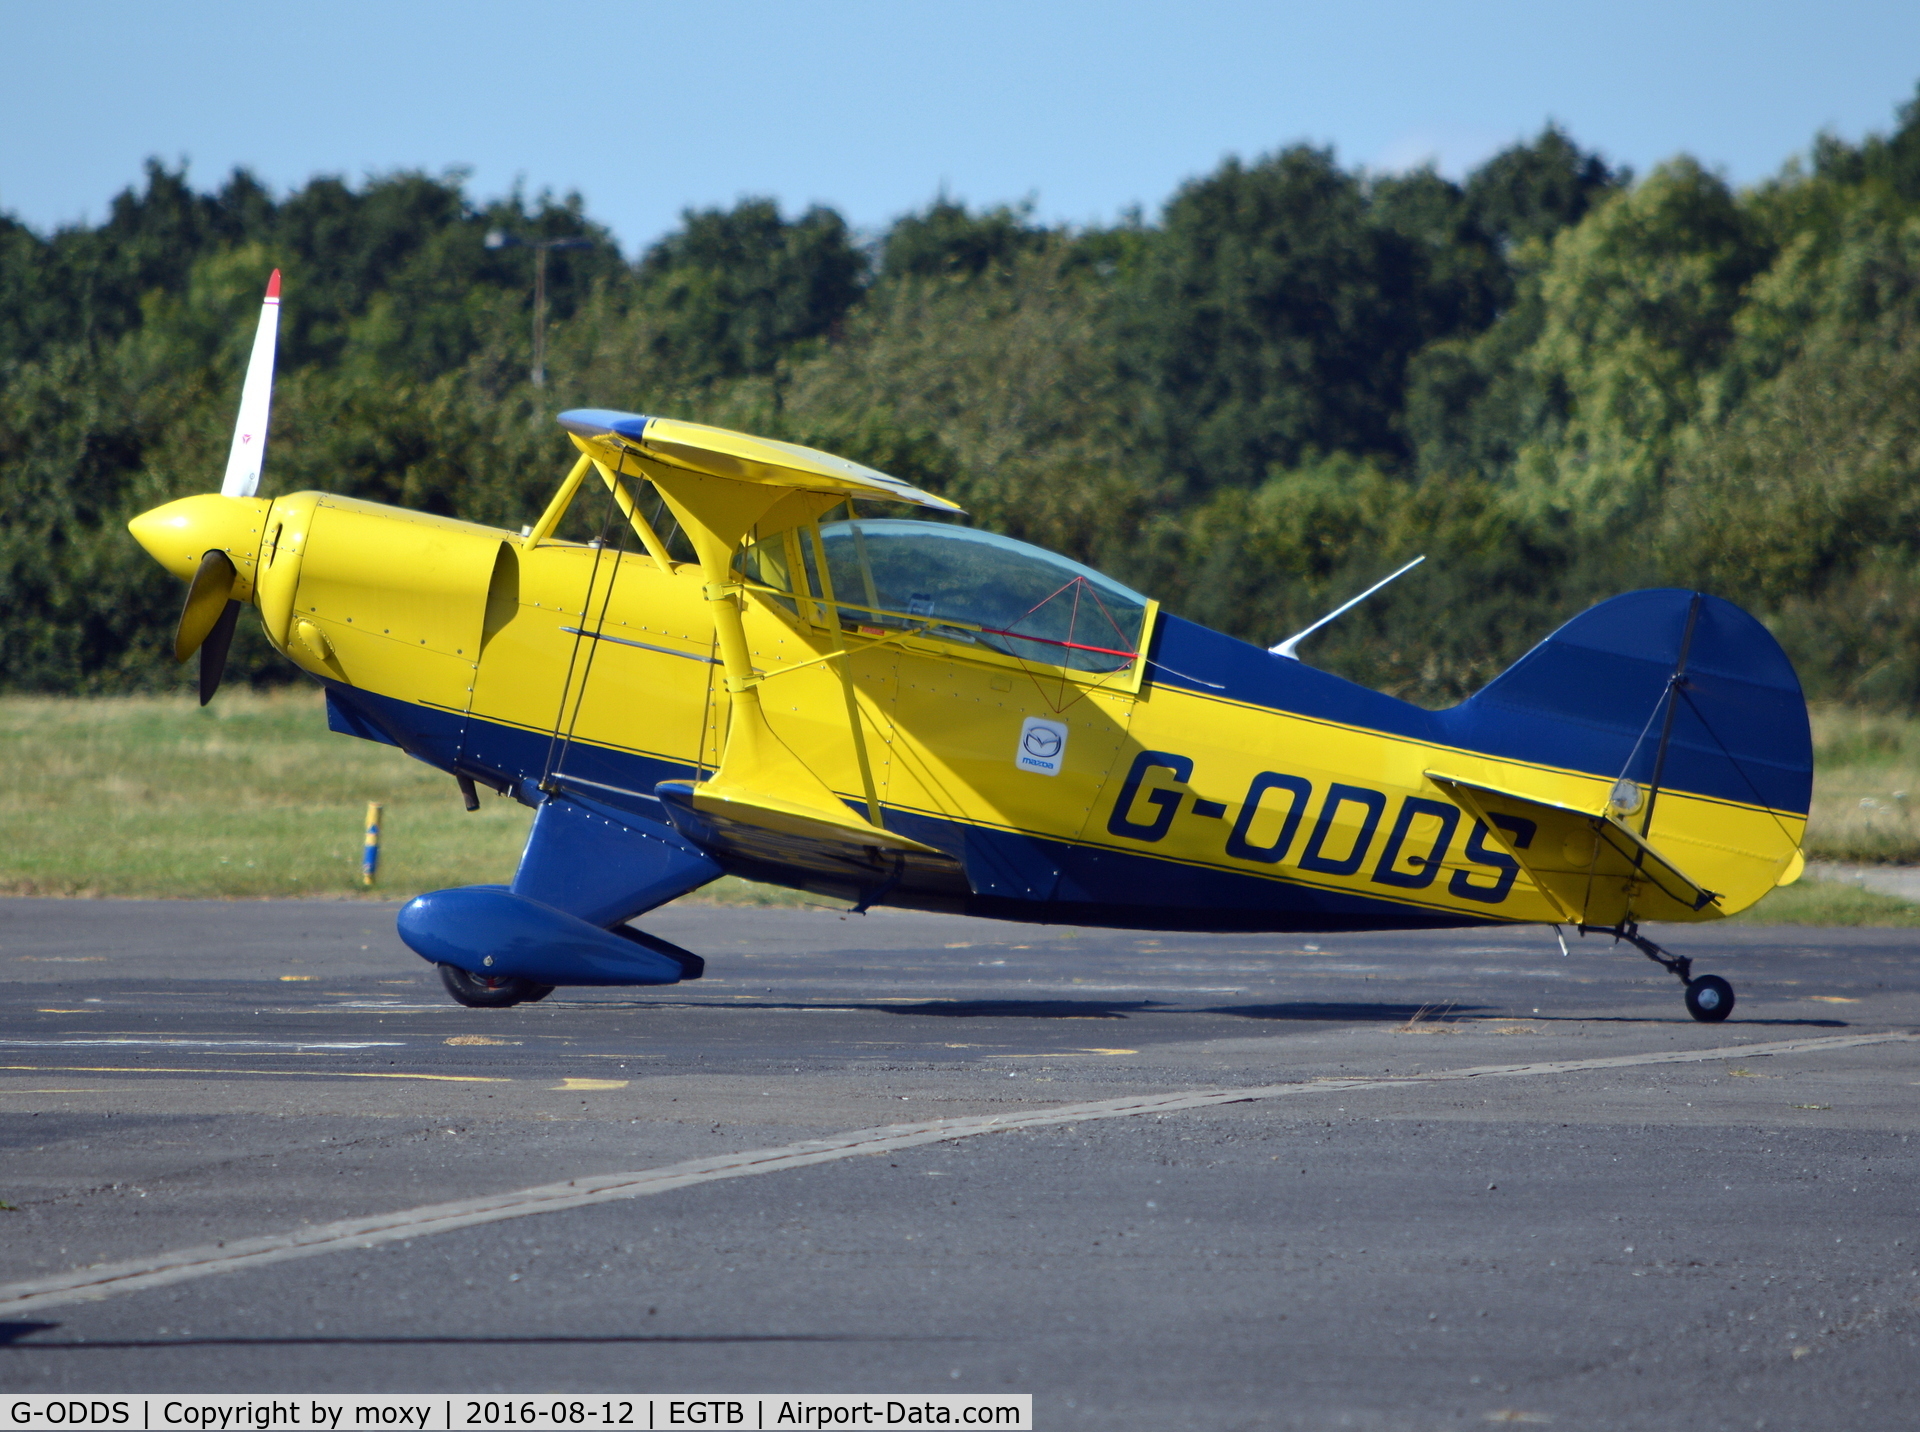 G-ODDS, 1980 Aerotek Pitts S-2A Special C/N 2225, Pitts S-2A at Wycombe Air Park. Ex N31486